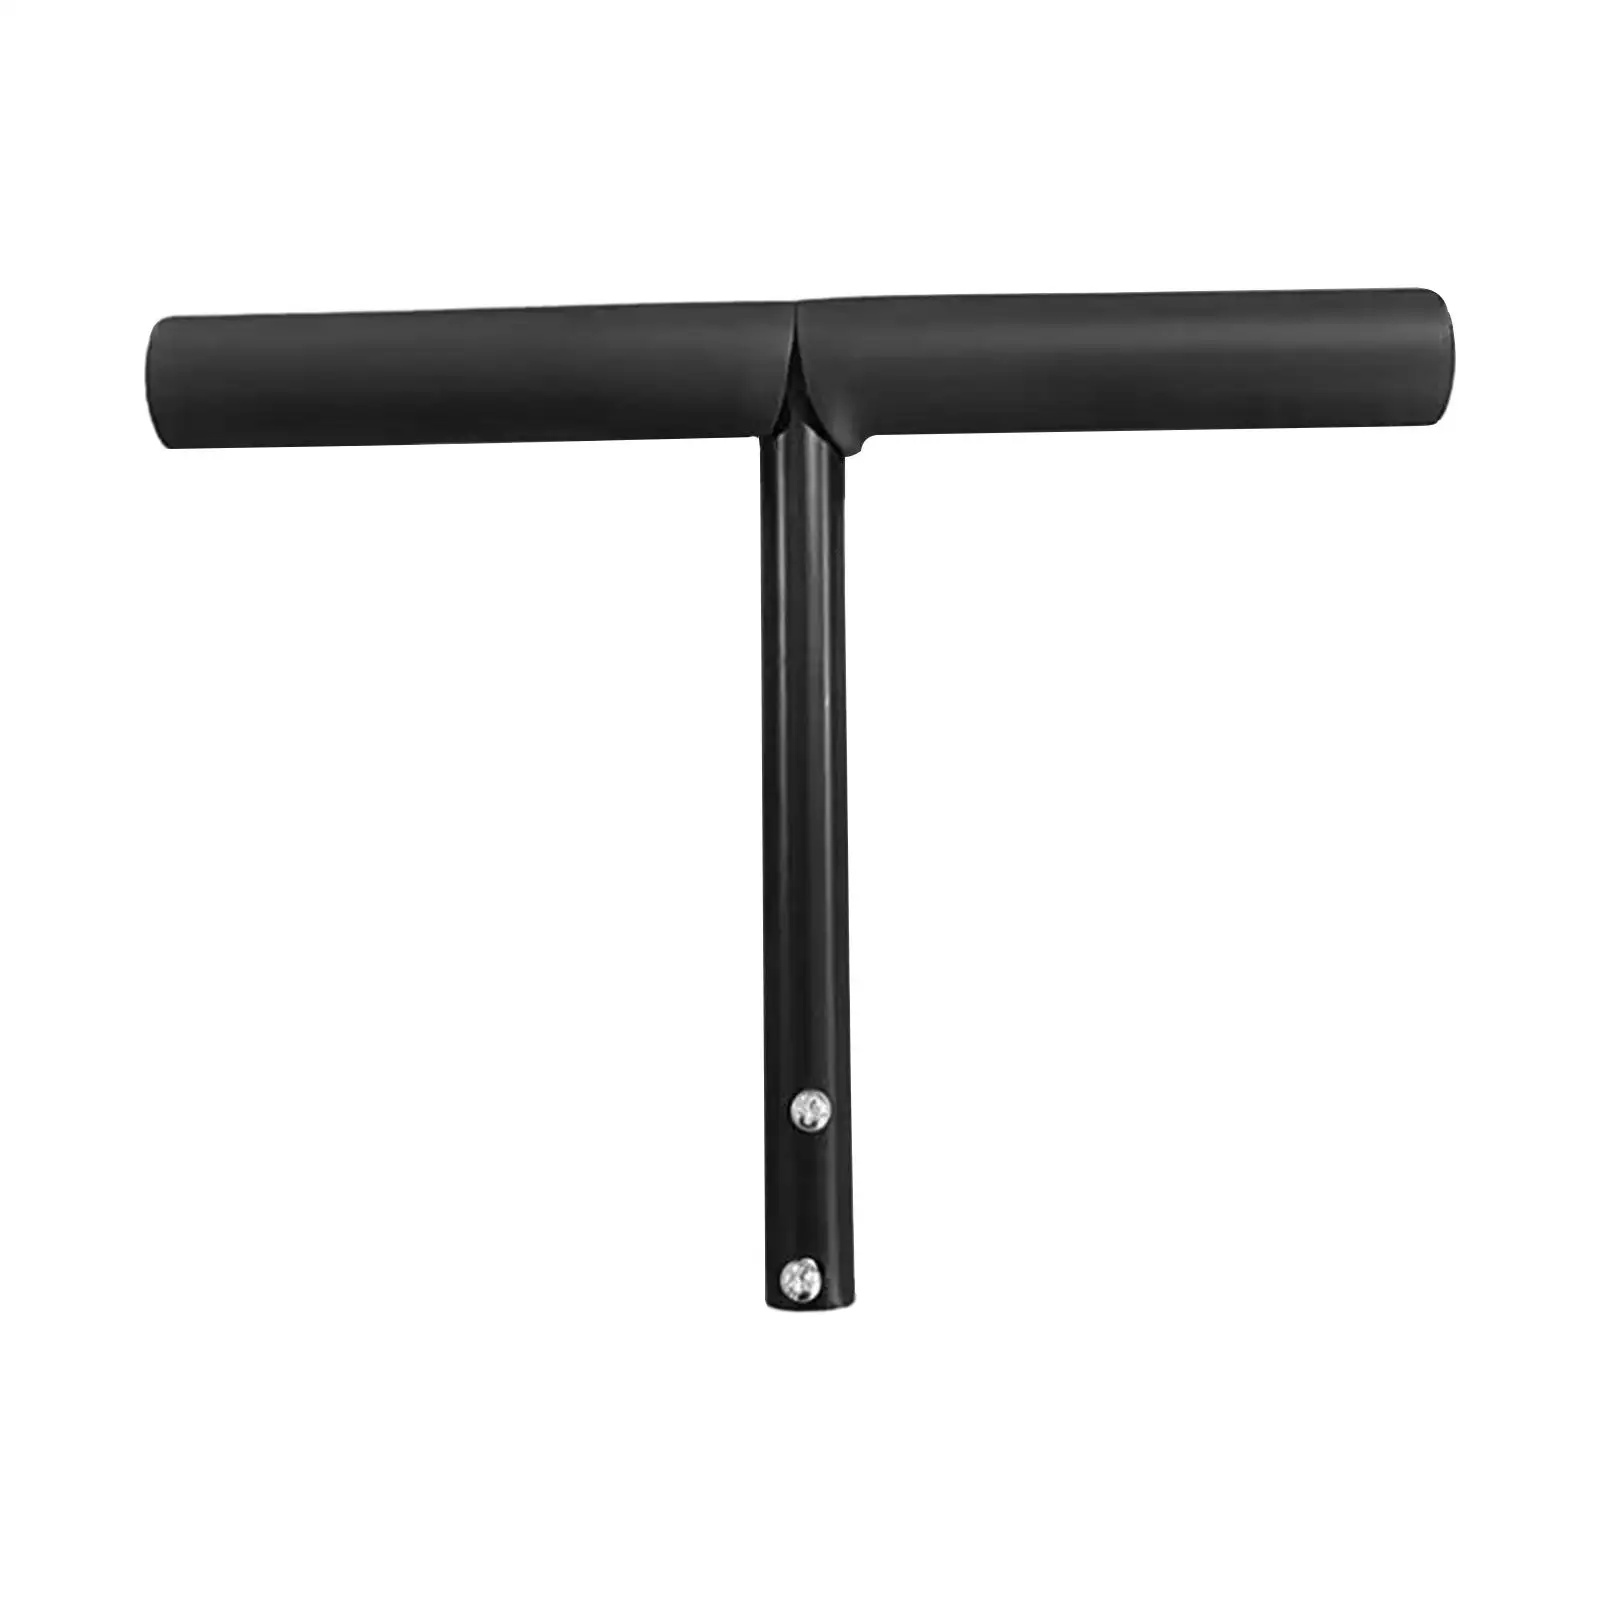 T Shaped Push Handle Bar, Replacement Parts, Practical, Durable, Baby Bike Accessory